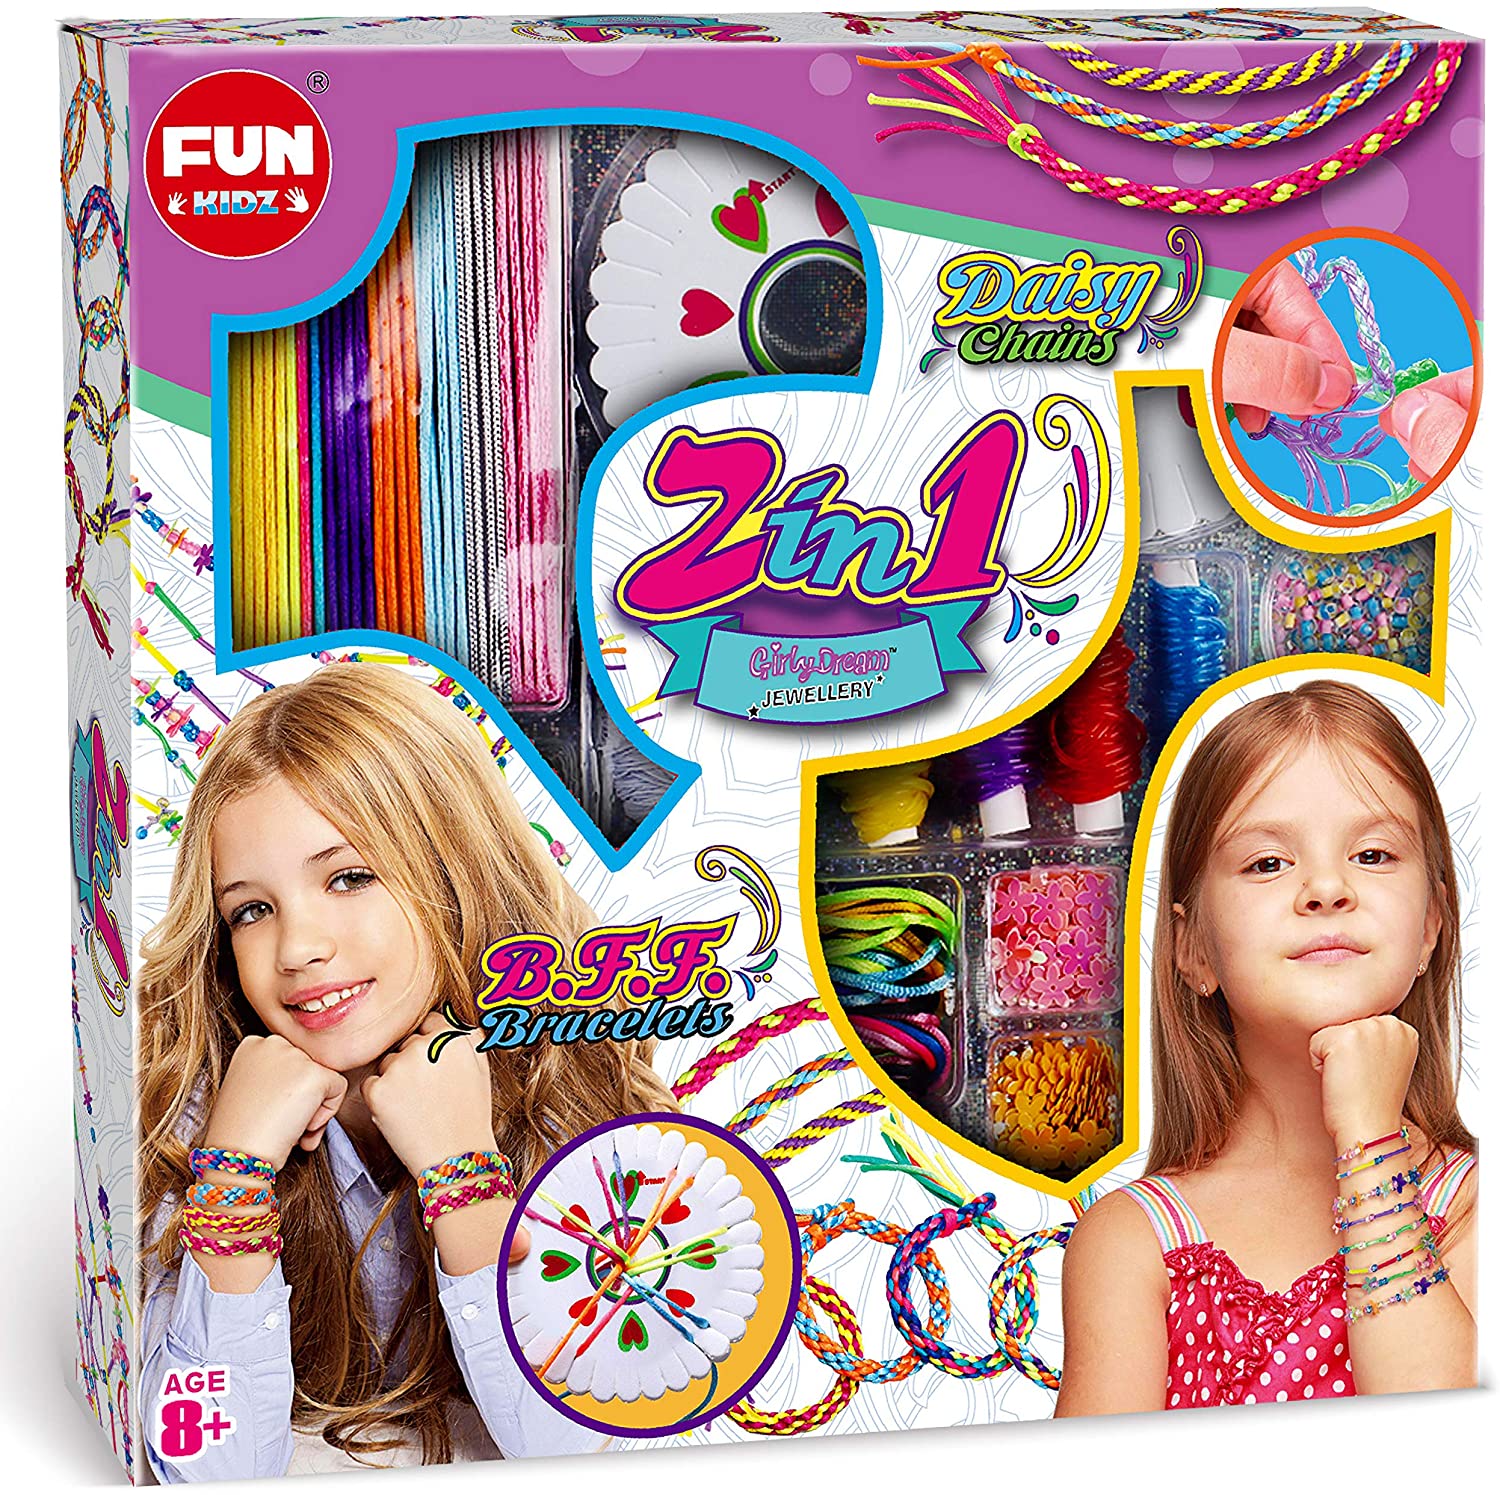 A14qS9Z2XL. AC SL1500 Best Gifts for 10 Year Old Girls Shopping for a preteen girl and just not sure what to get? Here are 20 of the BEST gifts for 10 year old girls and above. She's sure to adore one of these fabulous gifts!